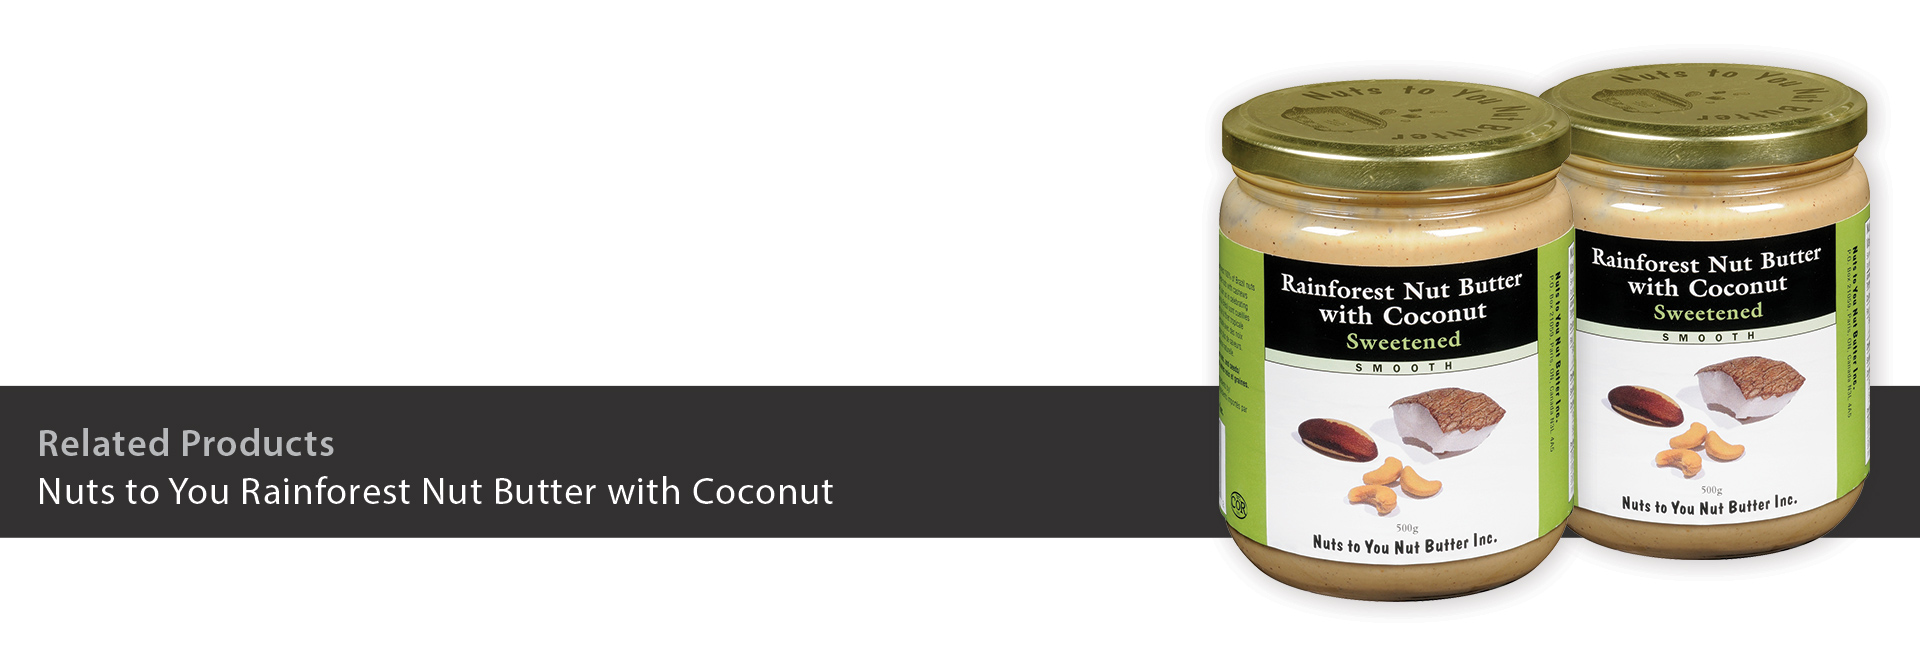 Nuts to You Rainforest Nut Butter with Coconut